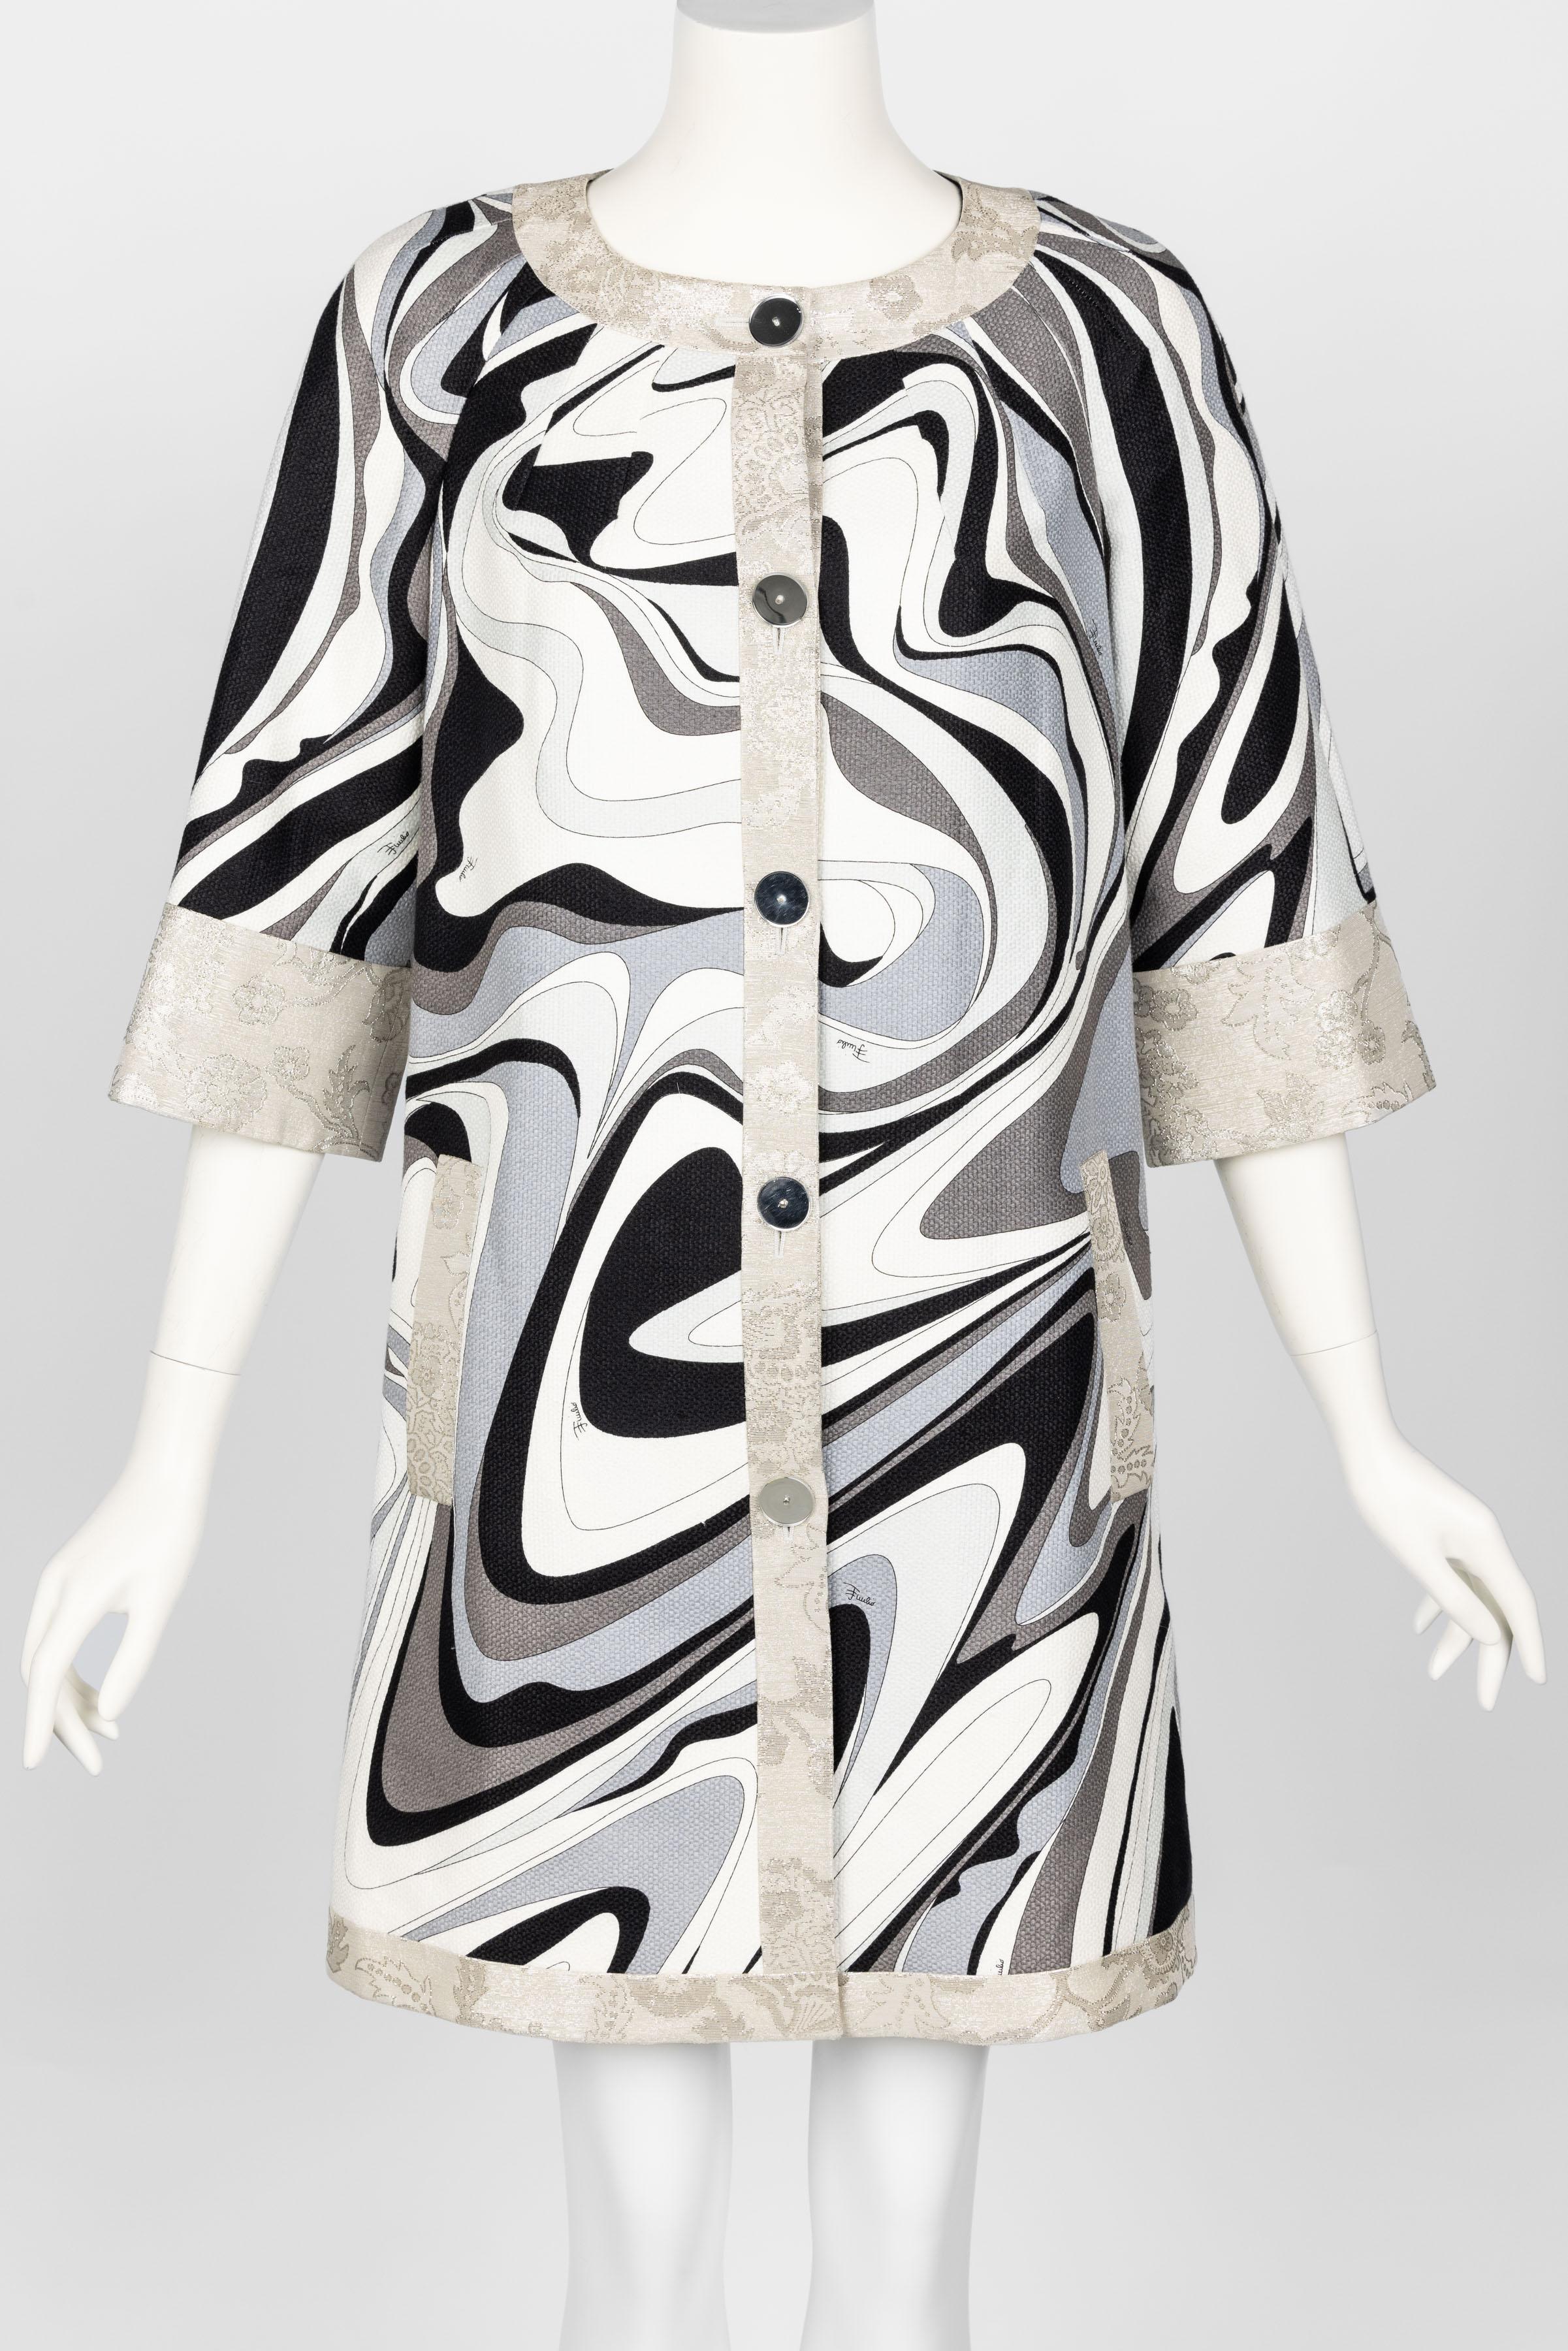 Emilio Pucci Silver Black Print Spring 2007 Runway Evening Coat In Excellent Condition For Sale In Boca Raton, FL